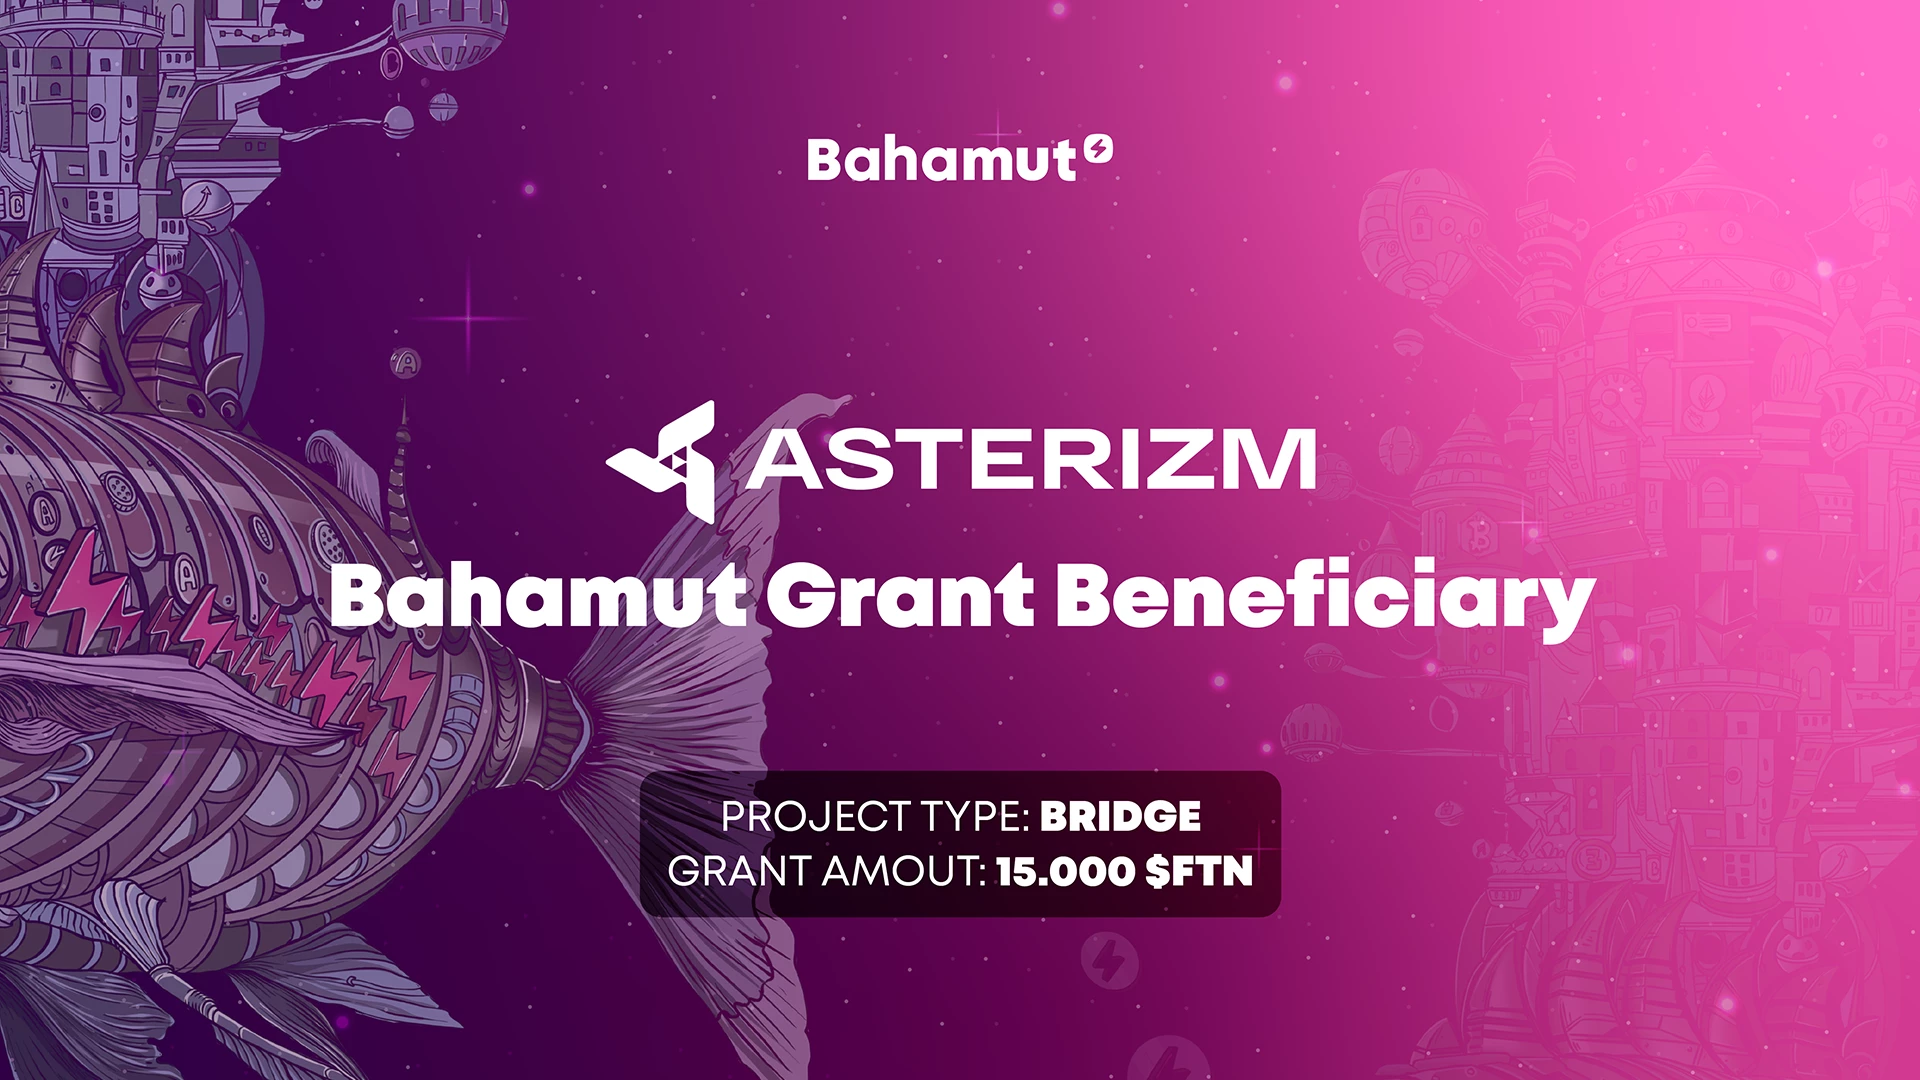 Asterizm is One of the Beneficiaries of the Bahamut Grant